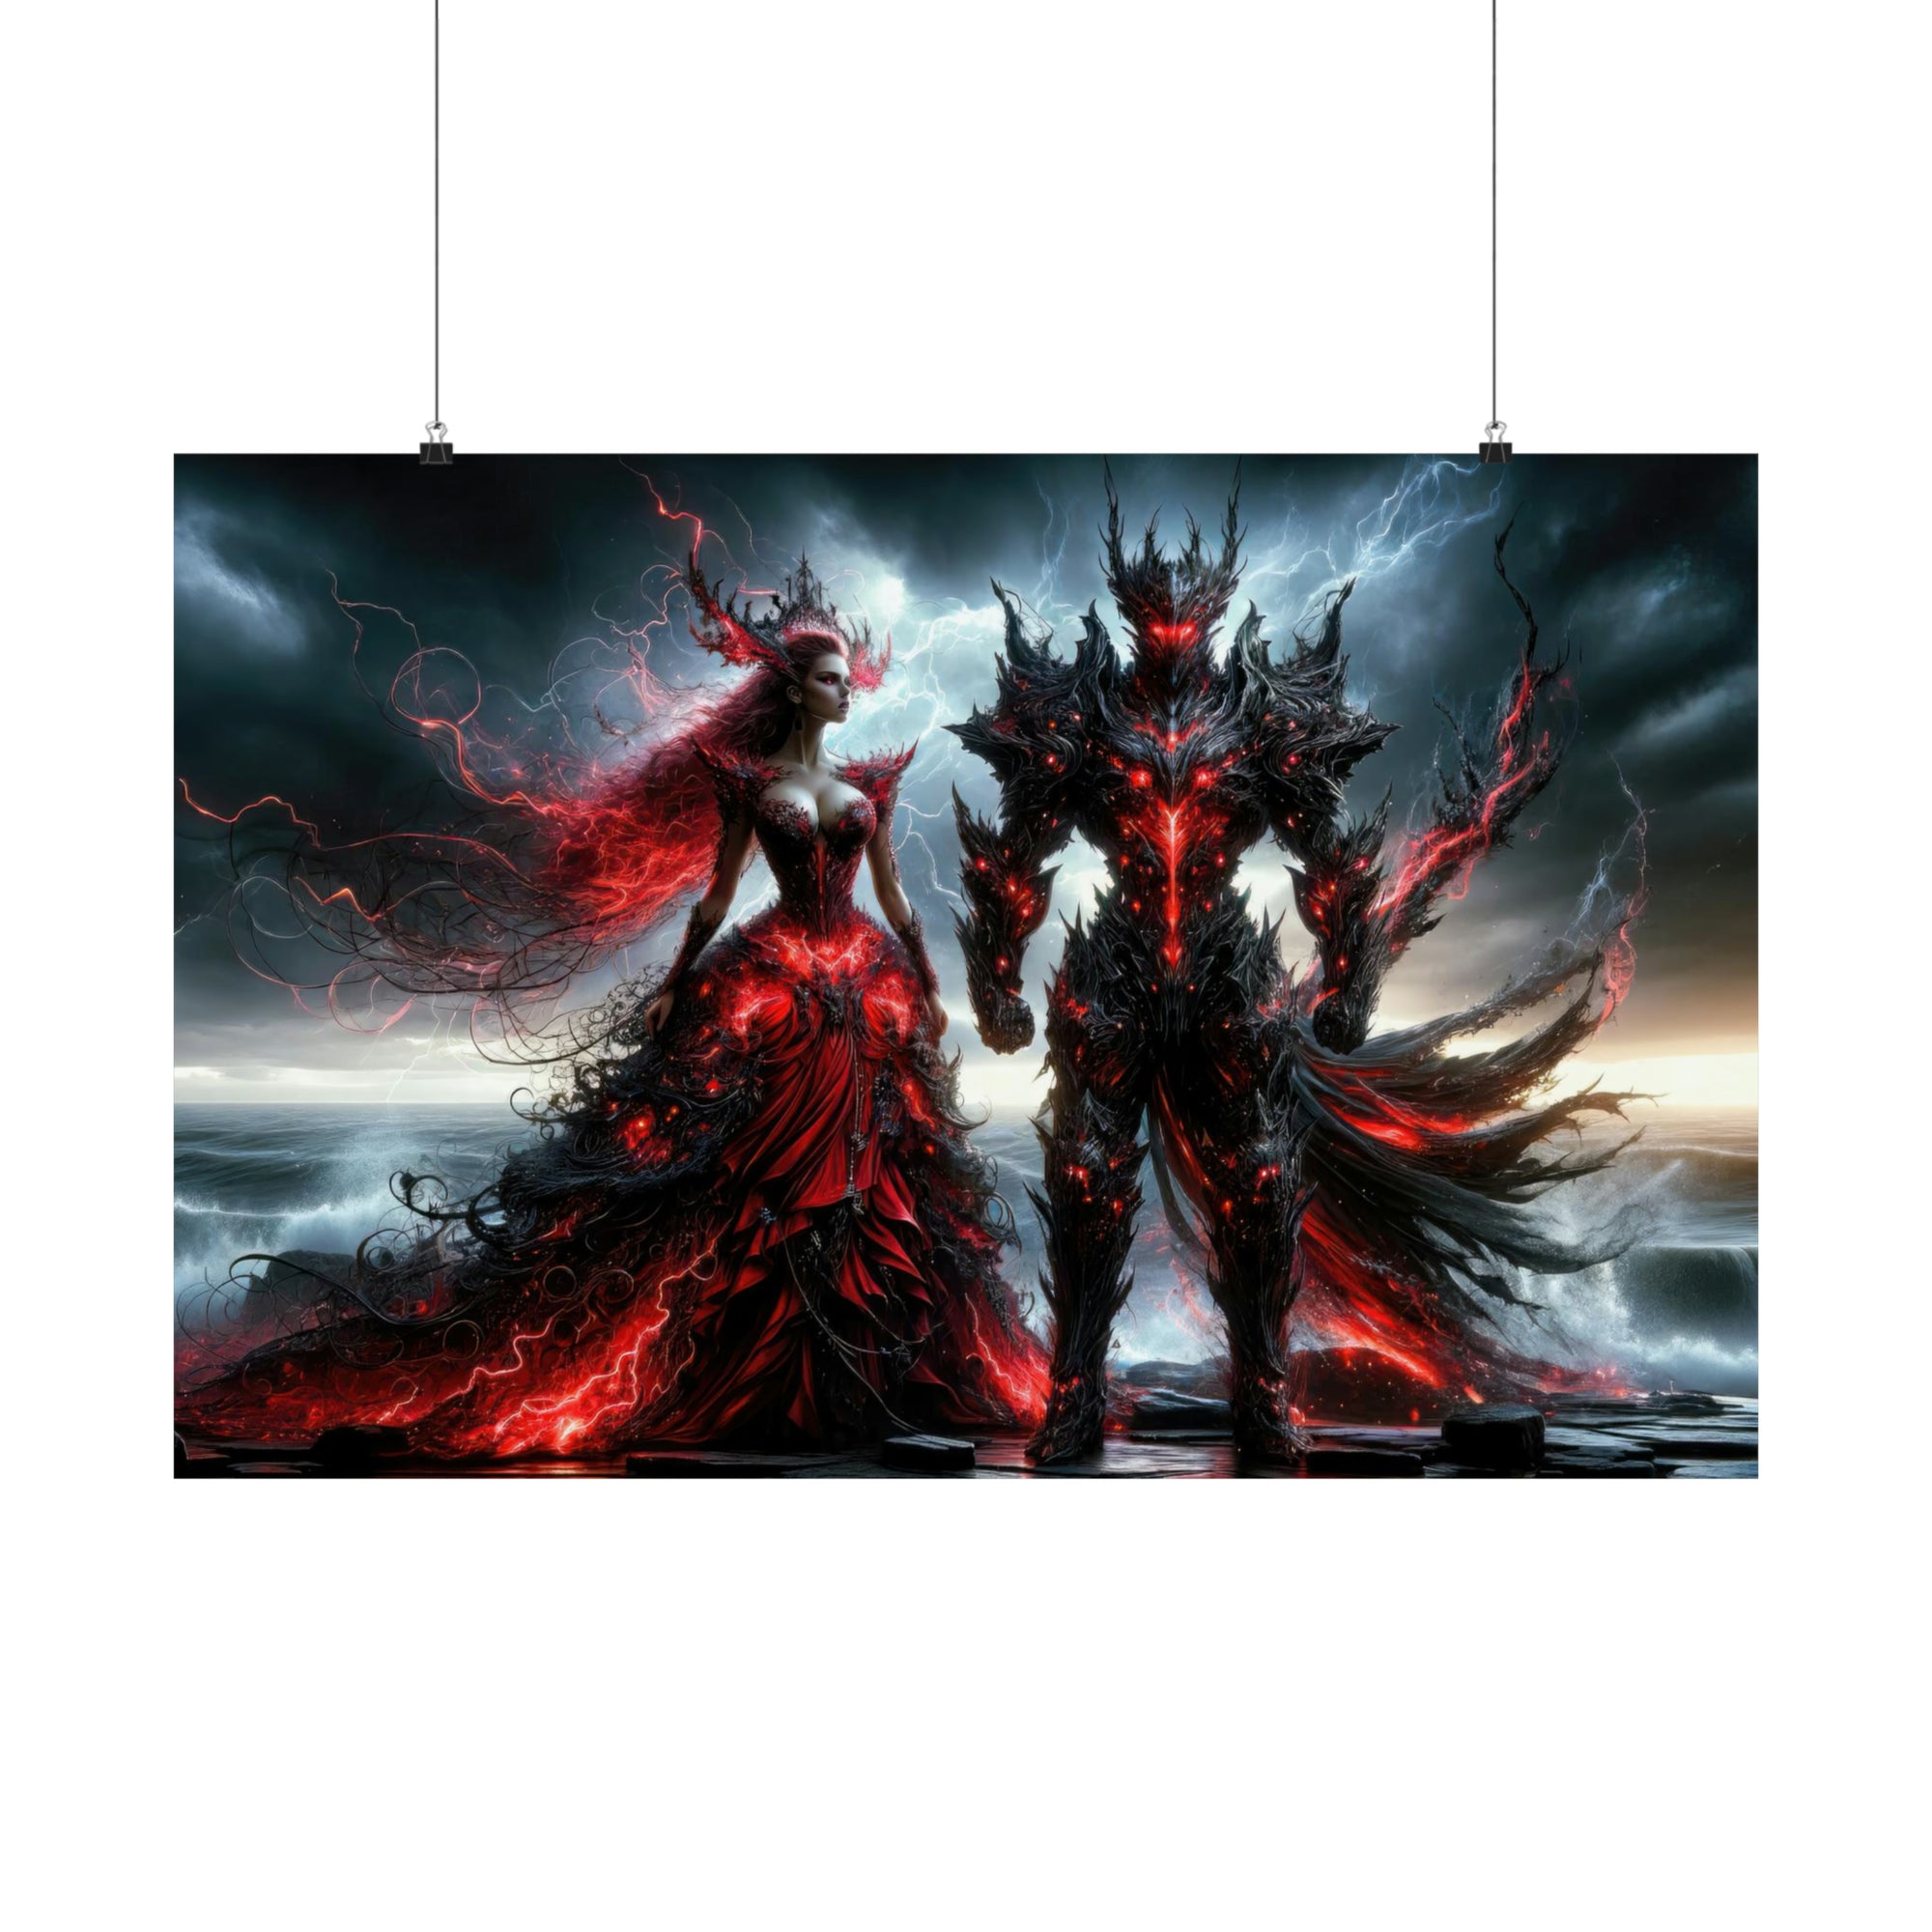 The Empress of Storms and the Knight of Shadows Poster